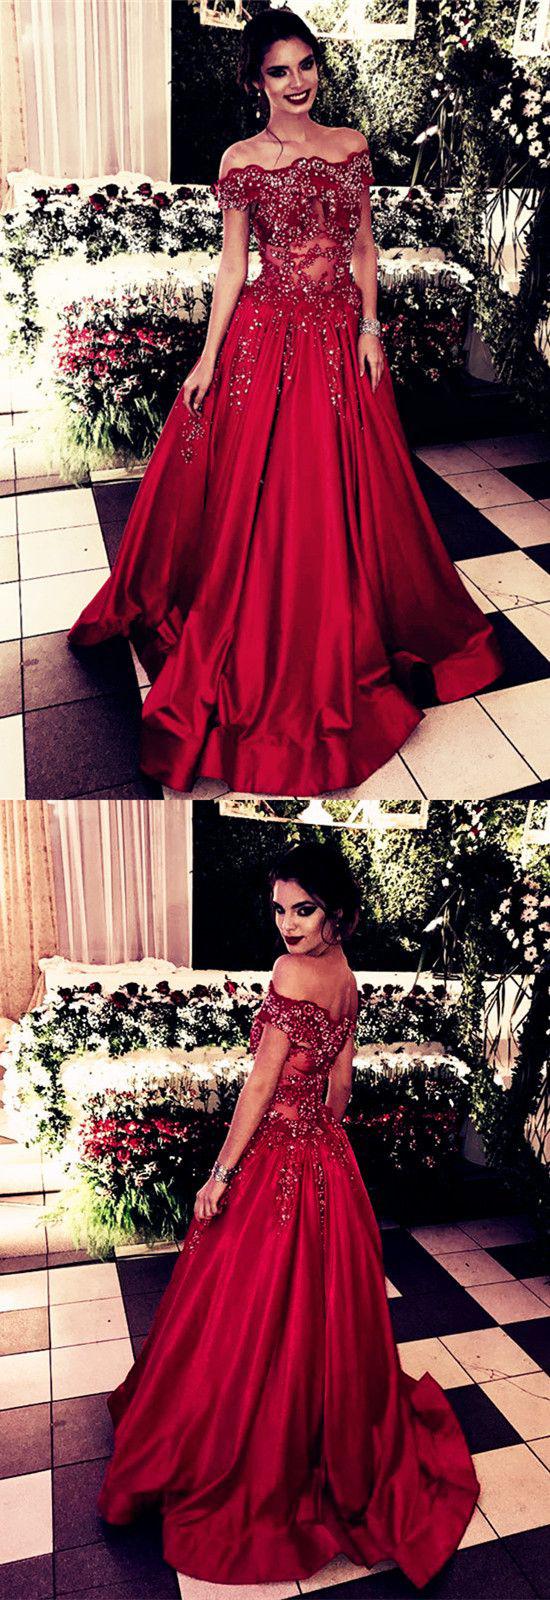 Lace Beaded Off Shoulder Long Evening Dresses Satin Prom Gowns 2018: burgundy gown,  Red Gown  